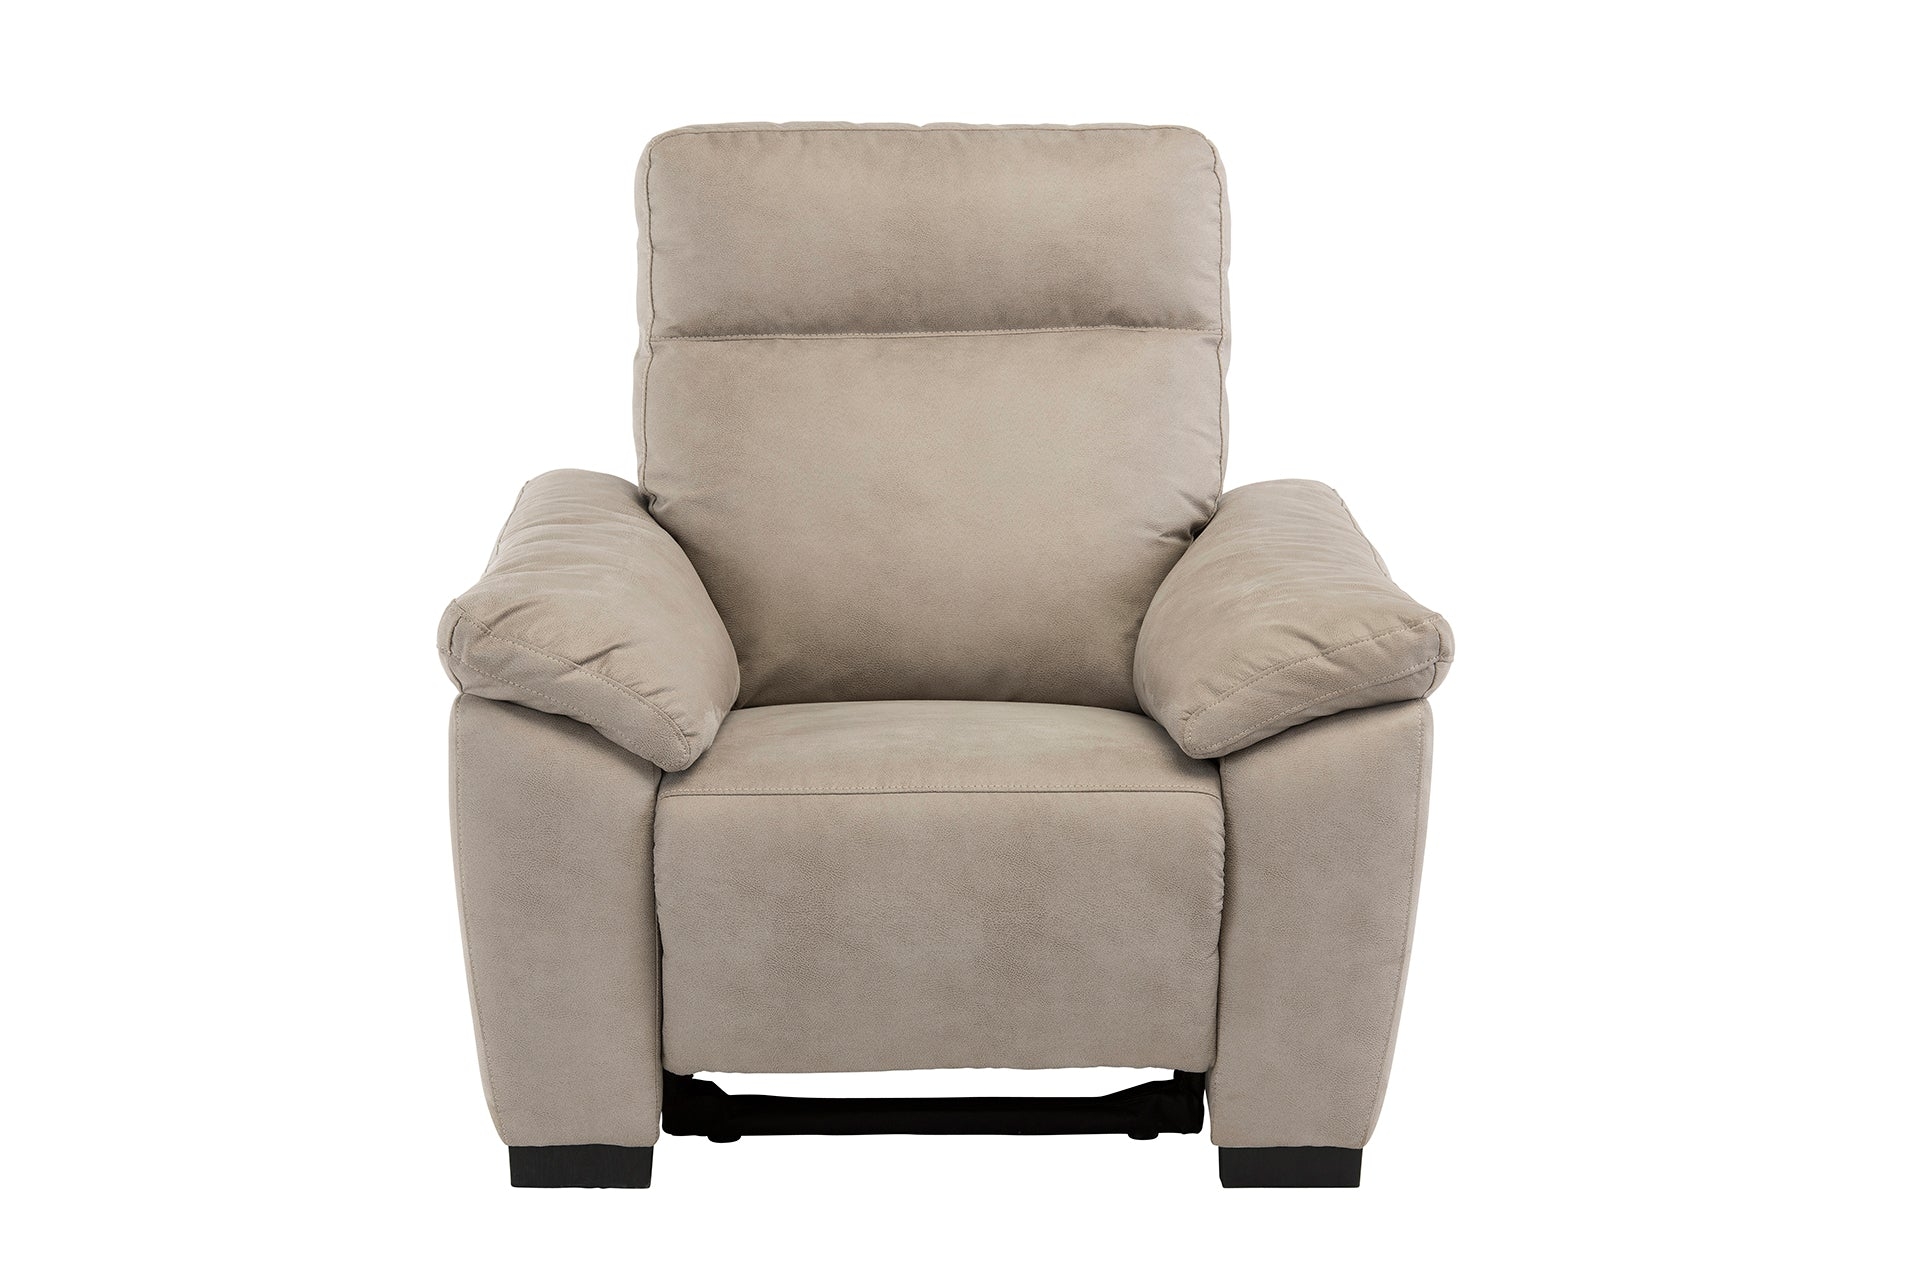 Farrell Full Electric Recliner In Soft Touch Fabric Armchair USB Port, Natural – Lc Living